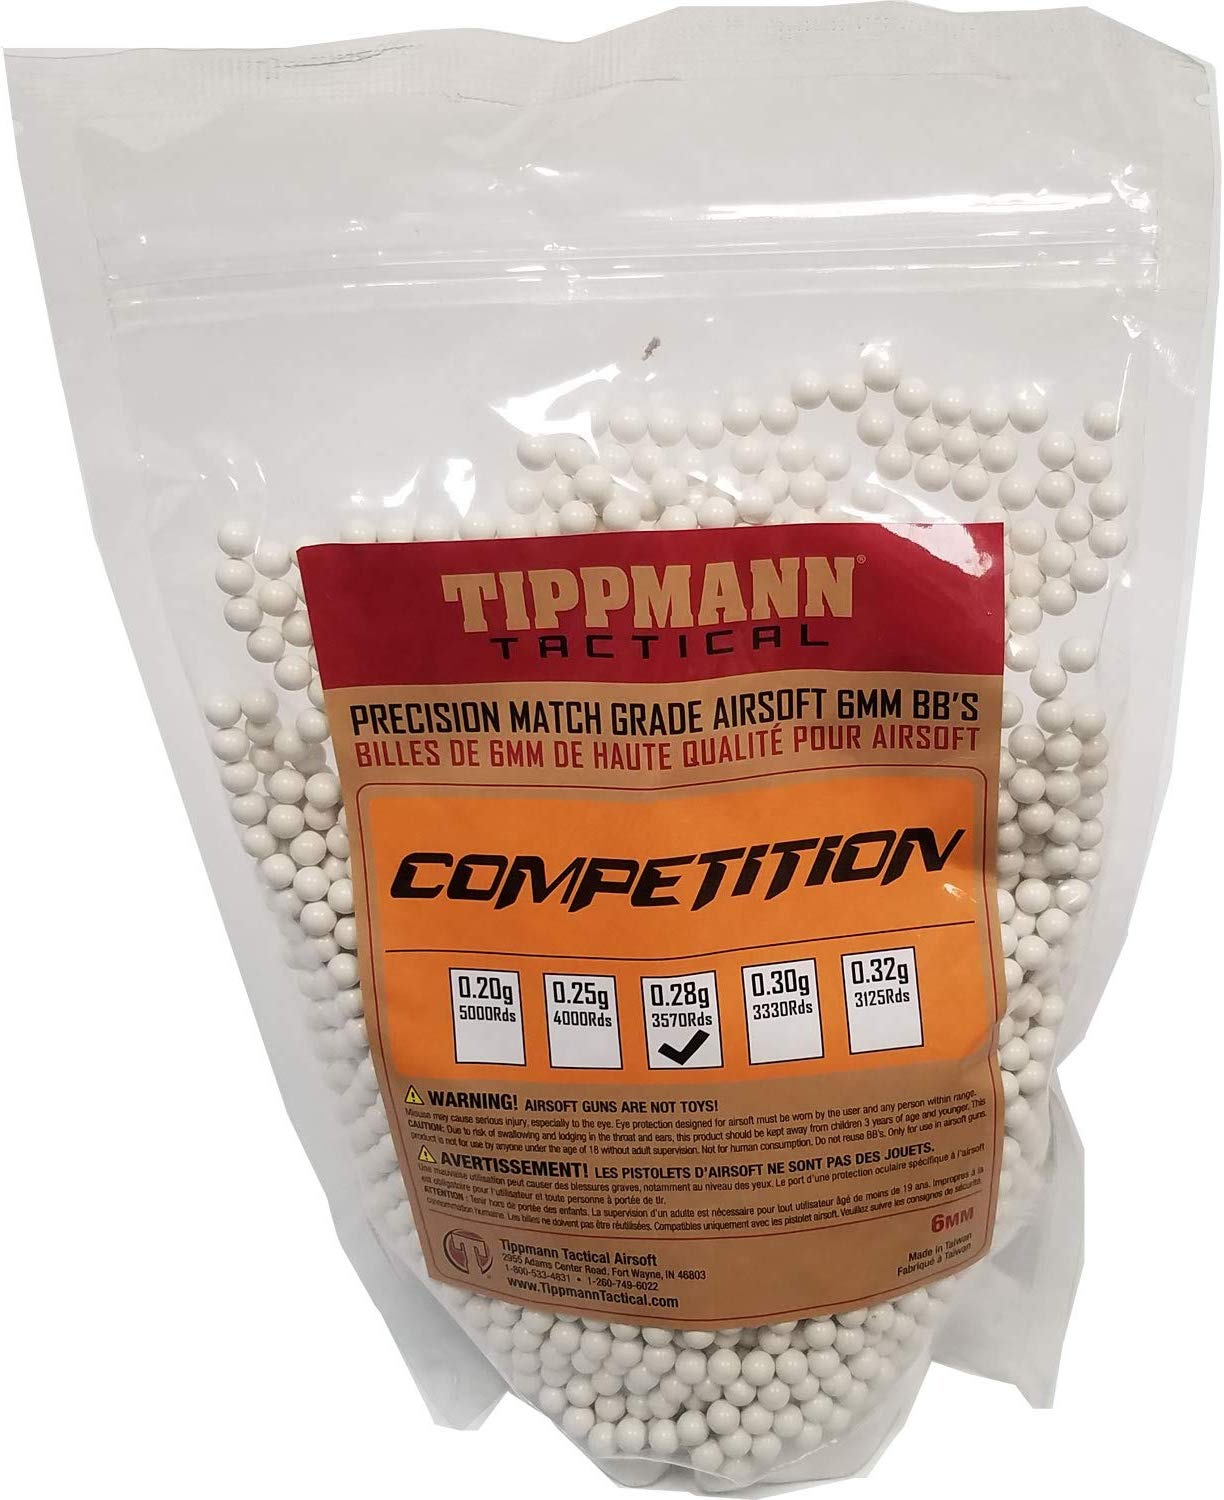 Tippmann Tactical Competition 6mm BBs 1kg Bag - White